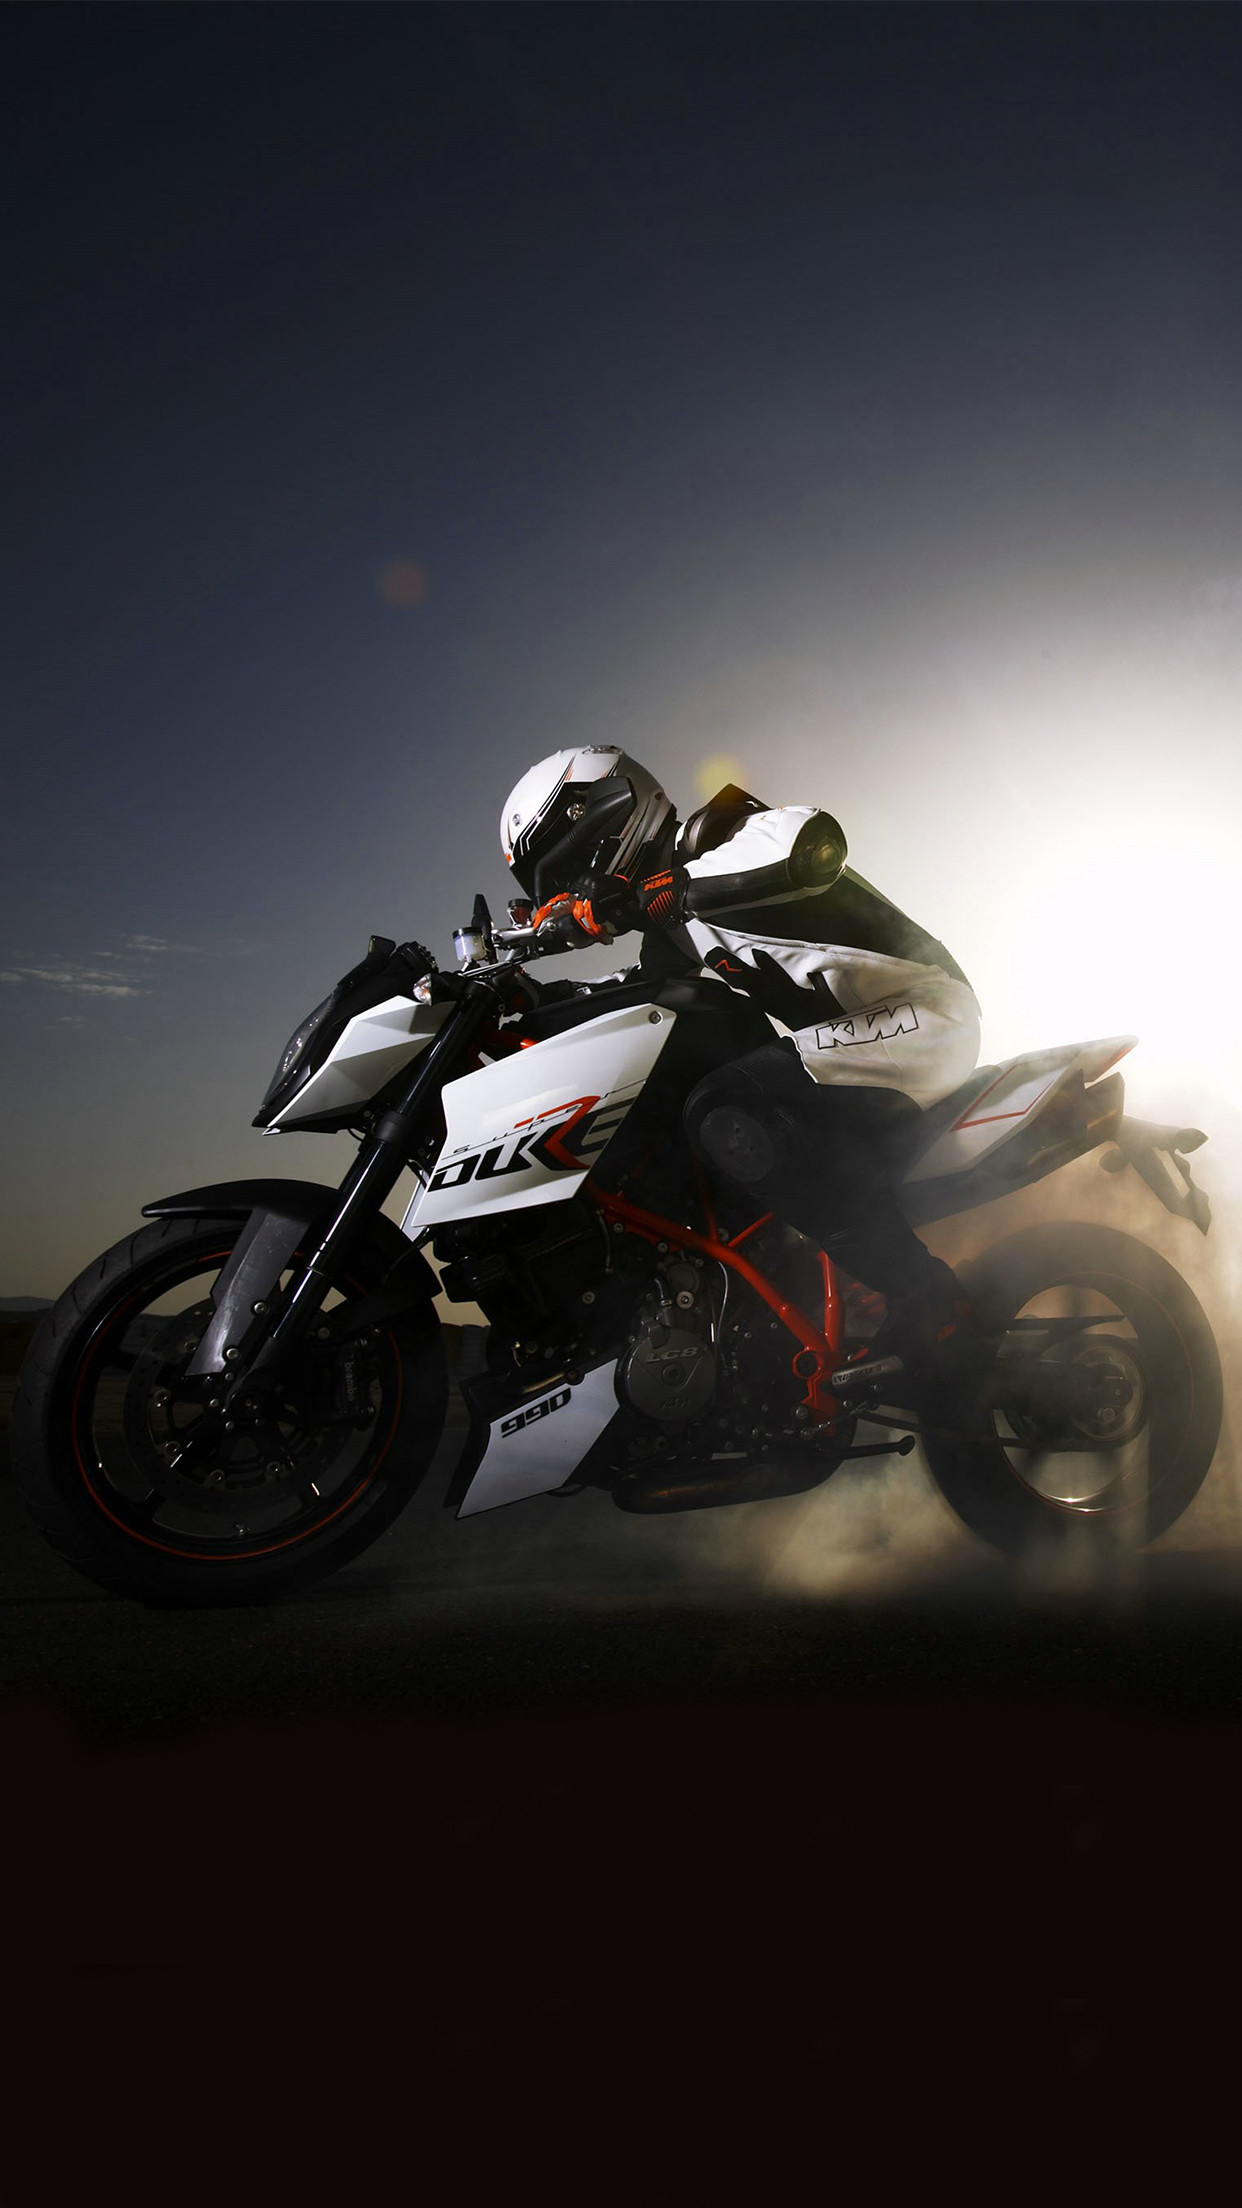 KTM iphone 6 full hd bike latest wallpapers free download iPhone .